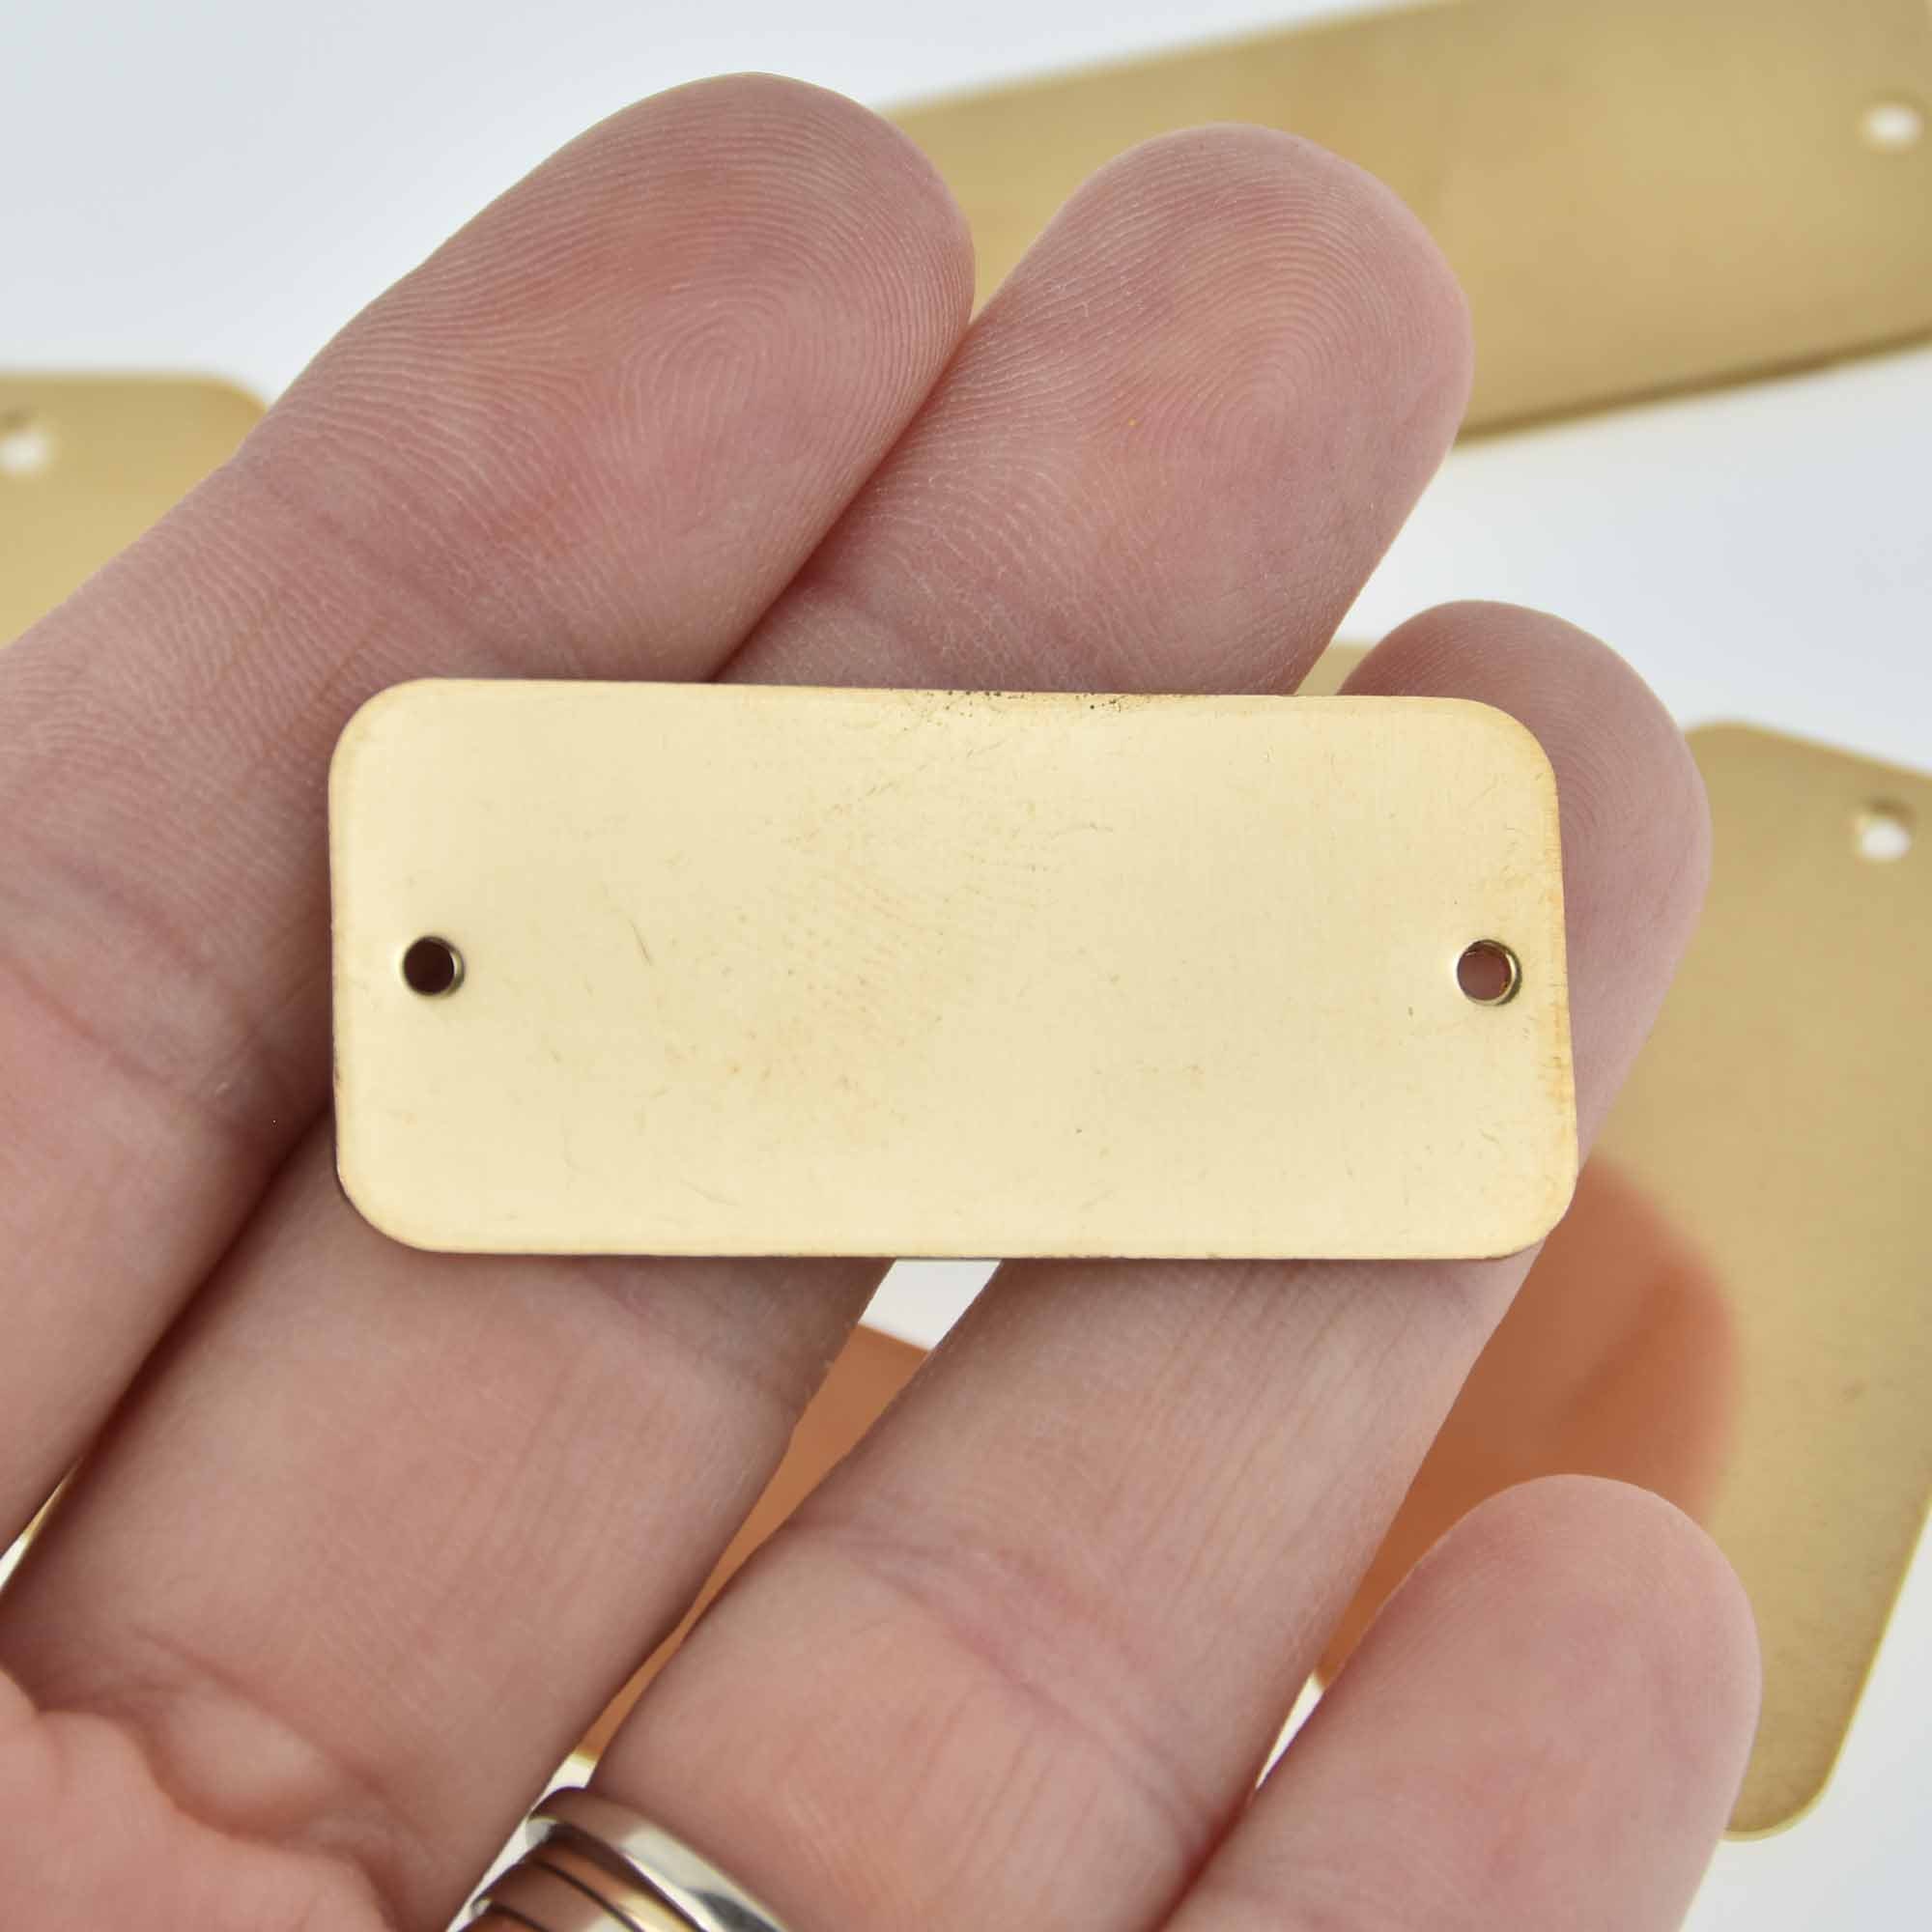  150 Pcs 1 Inch Solid Brass Tags for Stamping, Round Golden  Blank Brass Tag with Hole for Pets, Plants, Valve, Keys, Doors : Arts,  Crafts & Sewing